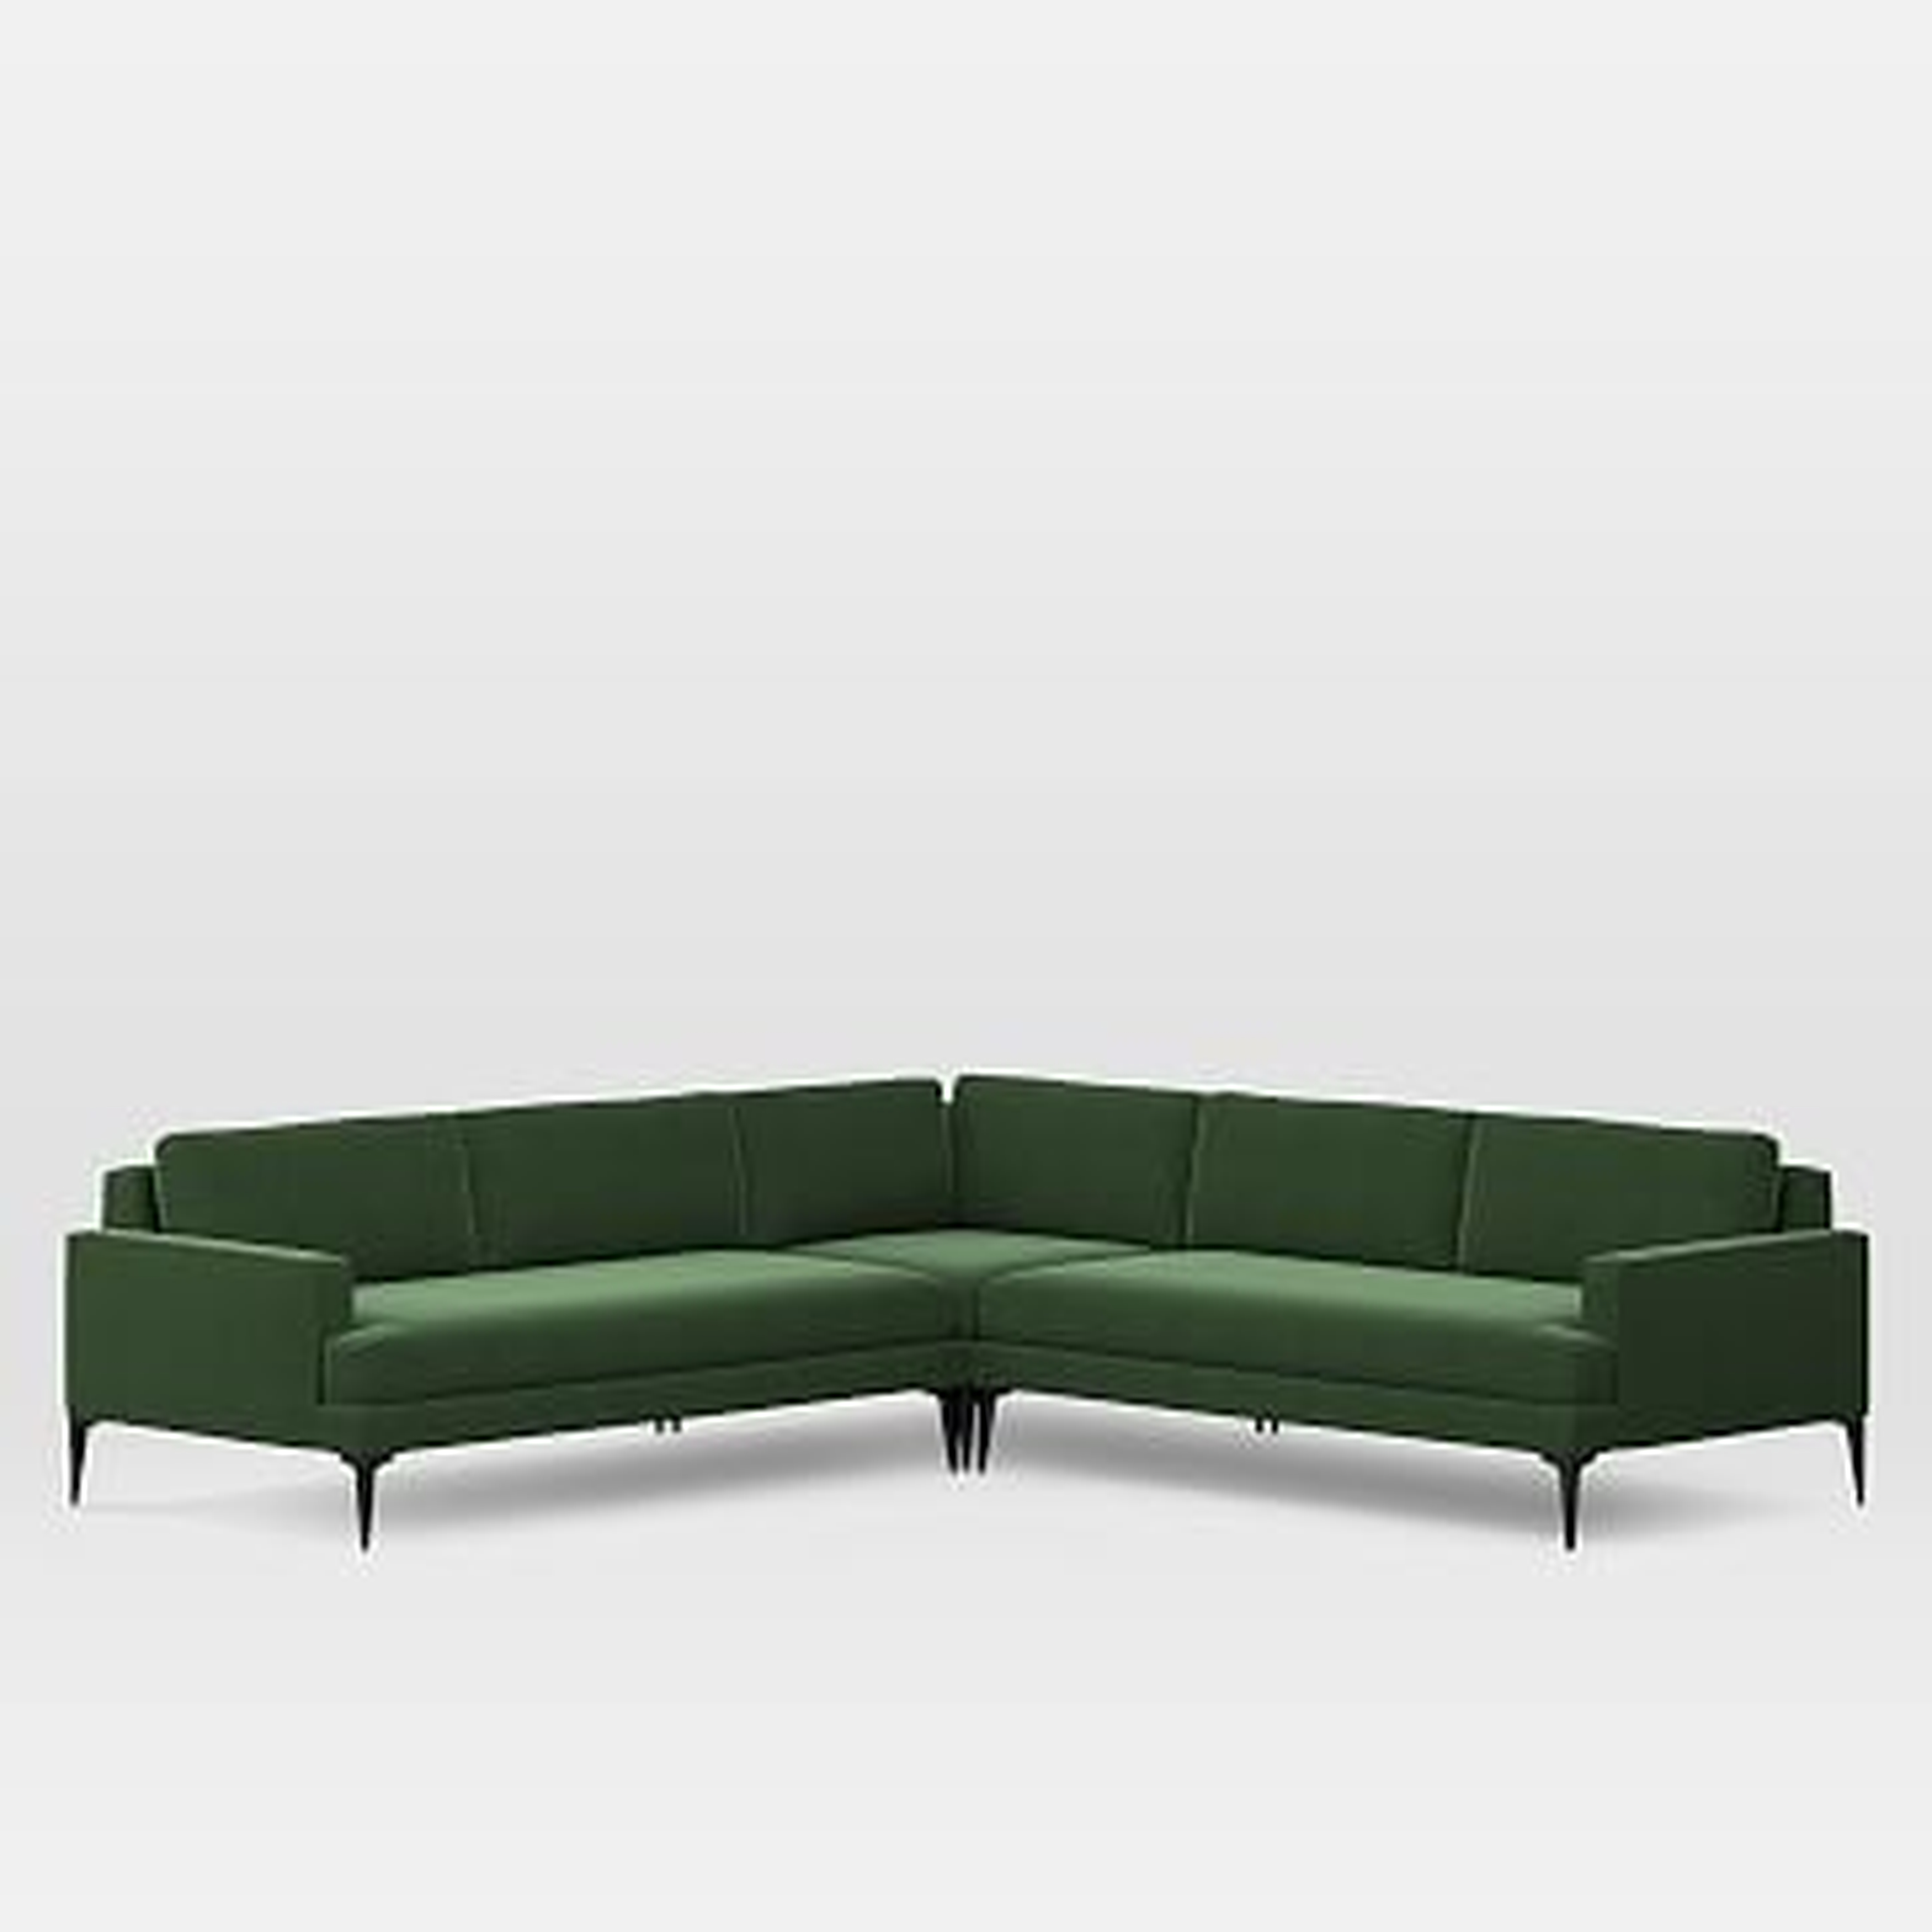 Andes Sectional Set 03: Left Arm 2.5 Seater Sofa, Corner, Right Arm 2.5 Seater Sofa, Poly, Performance Velvet, Moss, Dark Pewter - West Elm